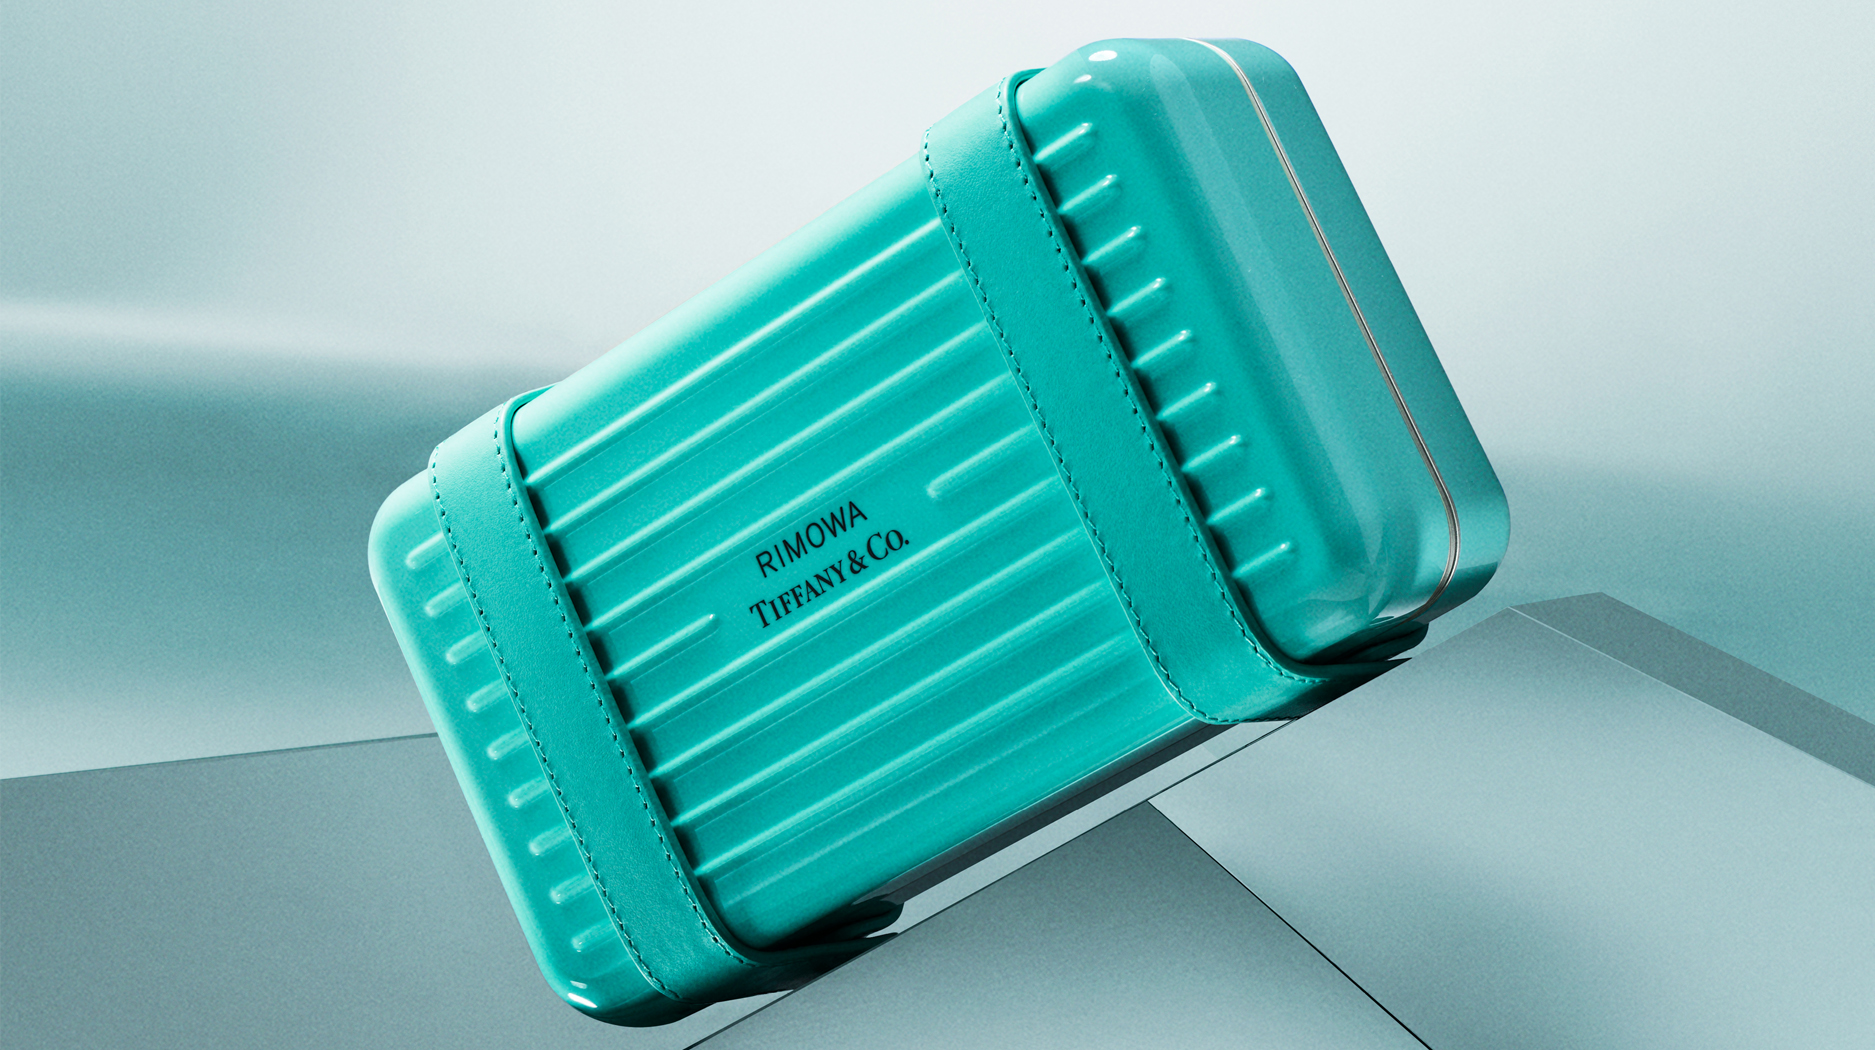 Luxury Luggage Maker Rimowa Is Auctioning a Collection of Retro